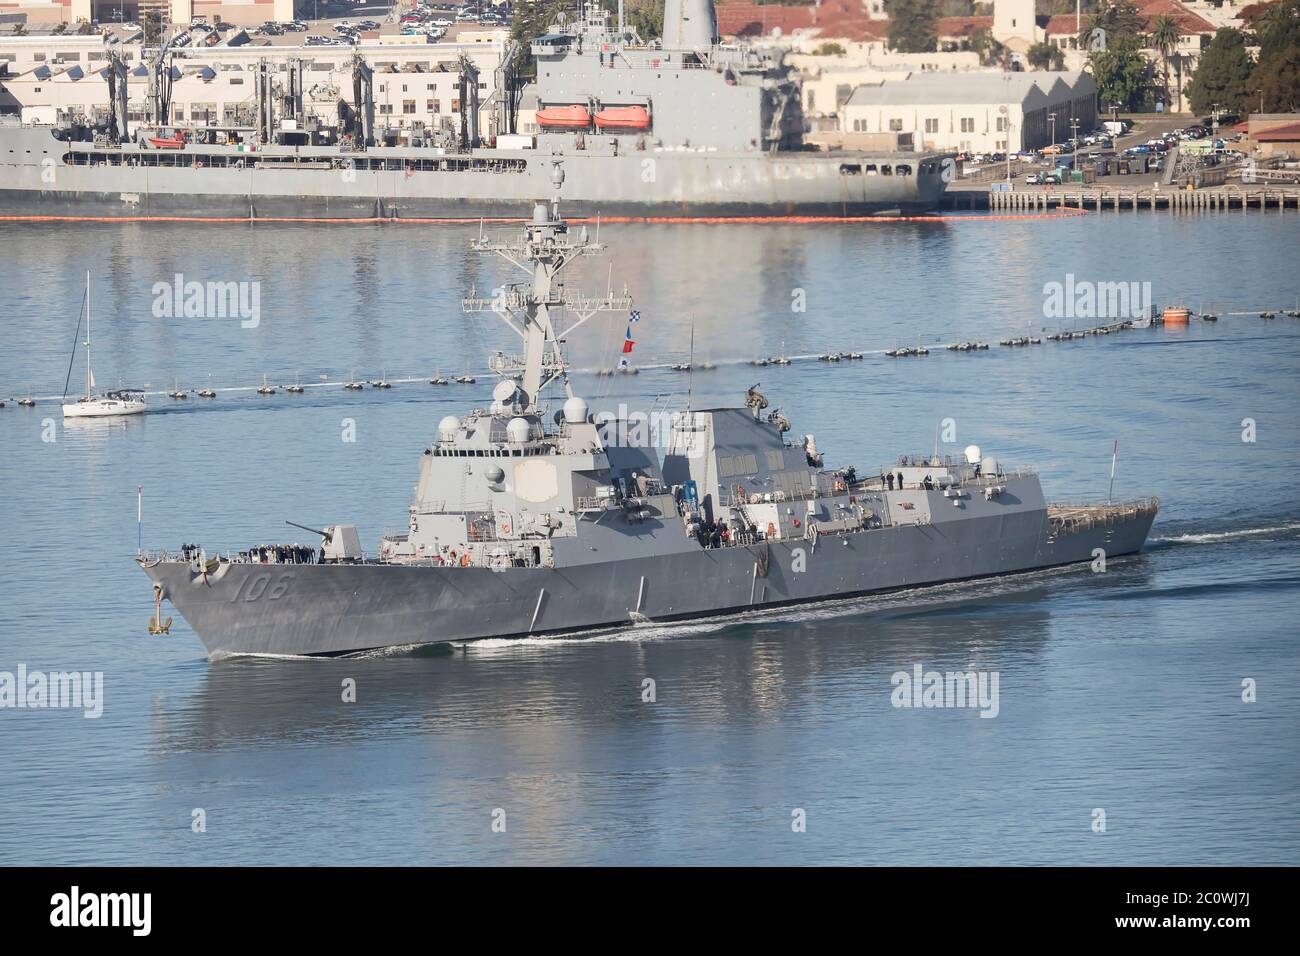 DDG-106 USS Stockdale Arleigh Burke Class Destroyer of the United States Navy at San Diego Naval Base October 2019 Stock Photo